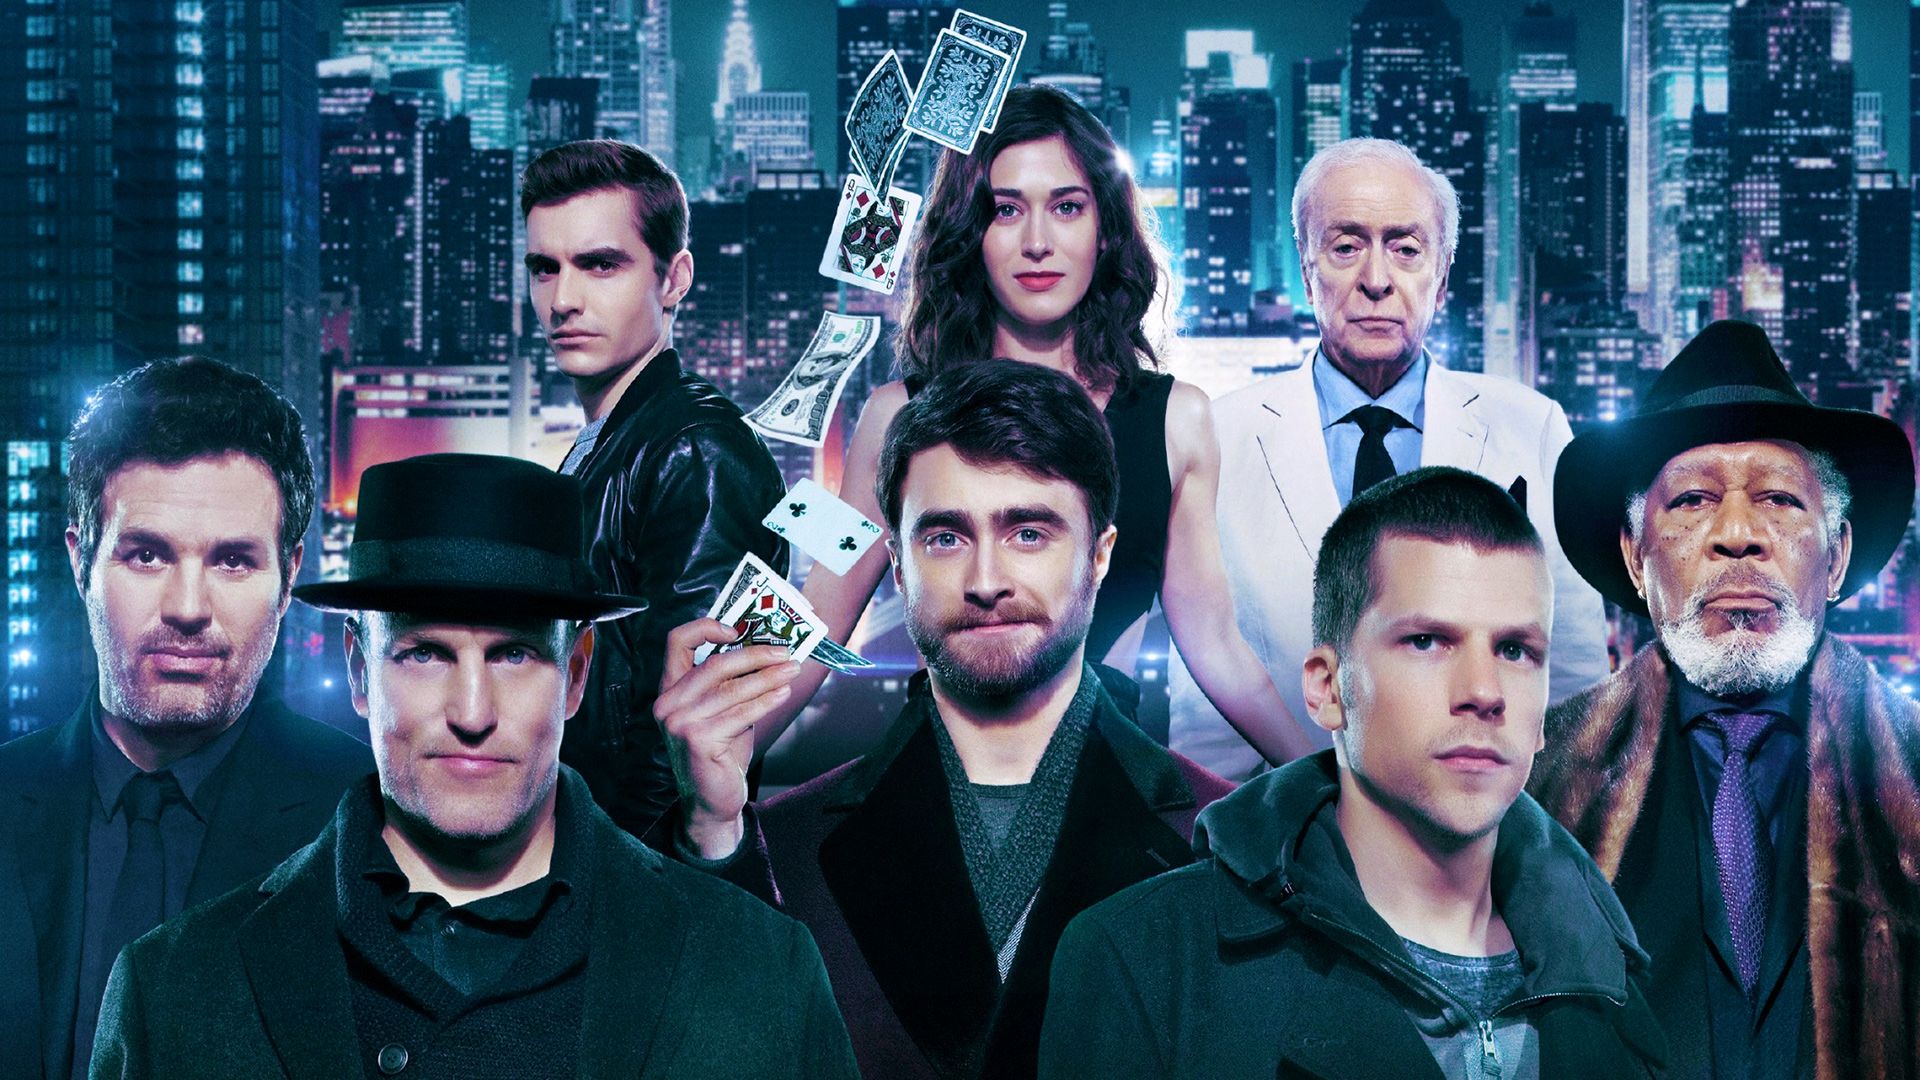 Now You See Me 2 background